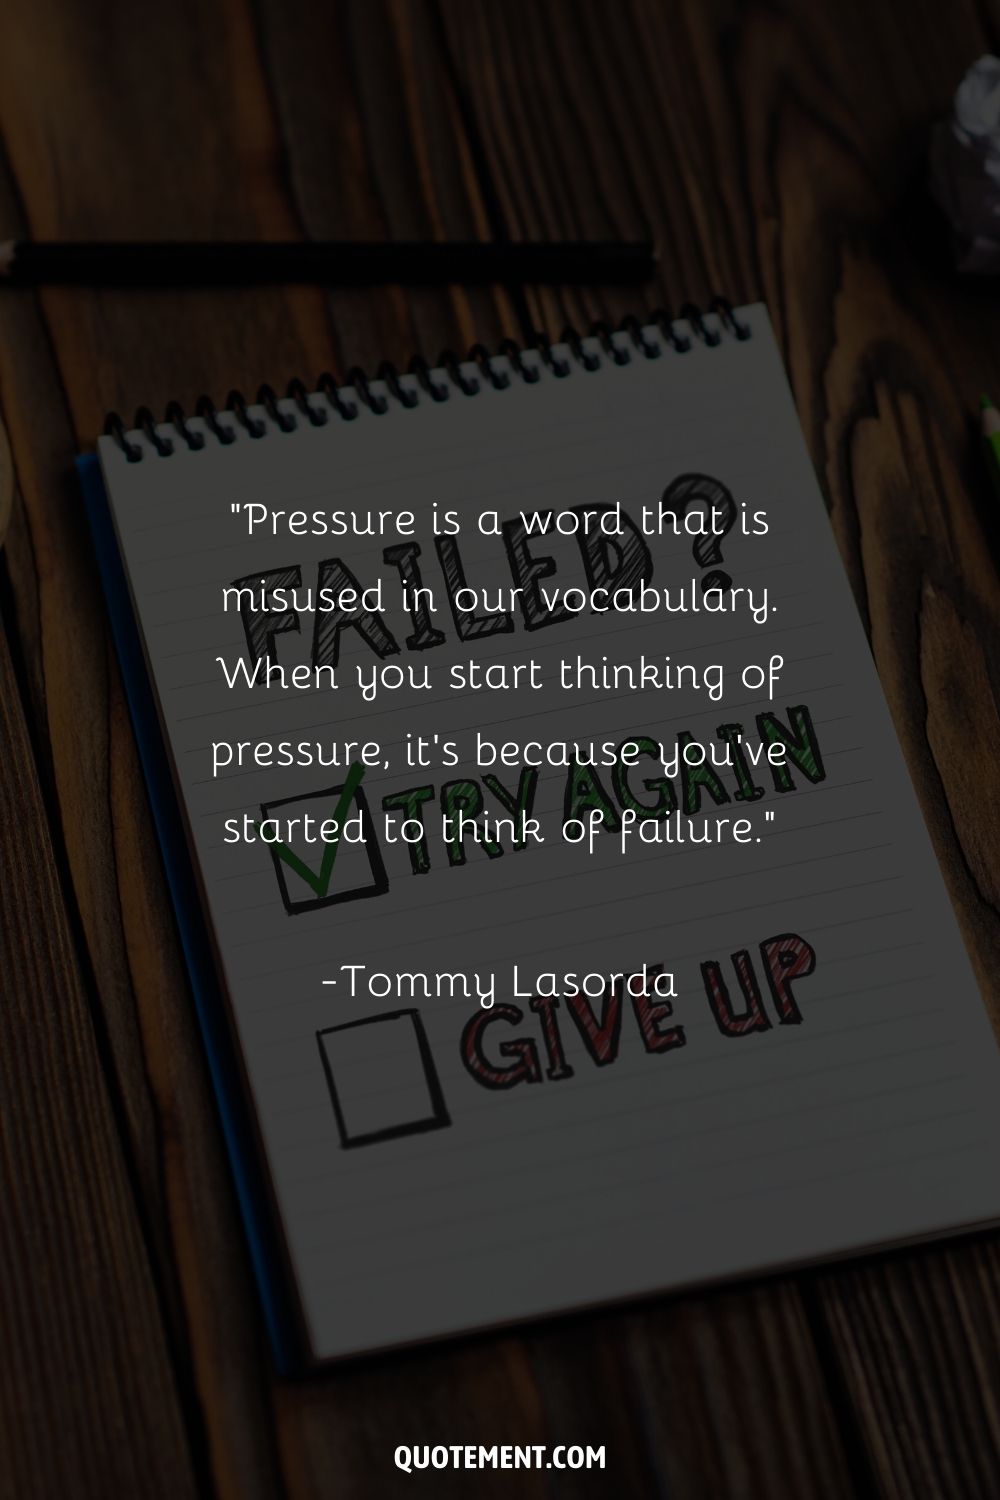 “Pressure is a word that is misused in our vocabulary. When you start thinking of pressure, it's because you've started to think of failure.” ― Tommy Lasorda